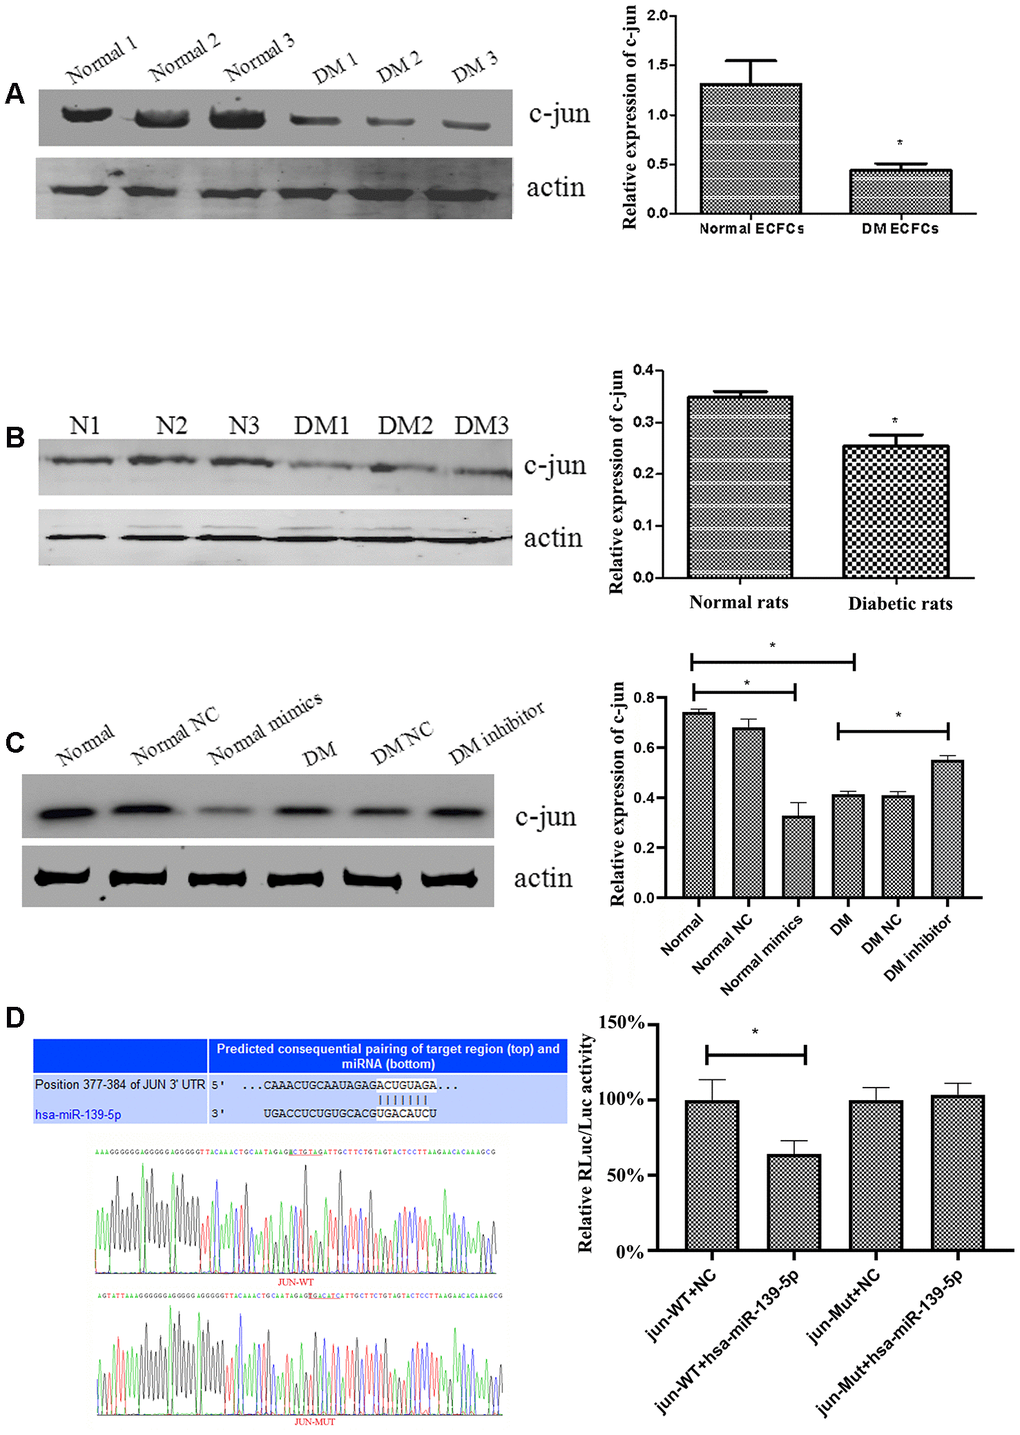 MiR-139-5p regulates the expression of c-jun. (A) C-jun expression was detected by Western blot in ECFCs derived from diabetic patients and healthy subjects. (N=3) *P B) C-jun expression was detected by Western blot in ECs derived from the thoracic aorta of diabetic rats and normal rats. (N=3) *P C) C-jun expression was detected by Western blot in normal ECFCs transfected with a miR-139-5p mimic and in diabetic ECFCs transfected with a miR-139-5p inhibitor. (N=3) *P D) Dual Luciferase Reporter Assay used to assess whether c-jun was the target of miR-139-5p. (N=3) *P 